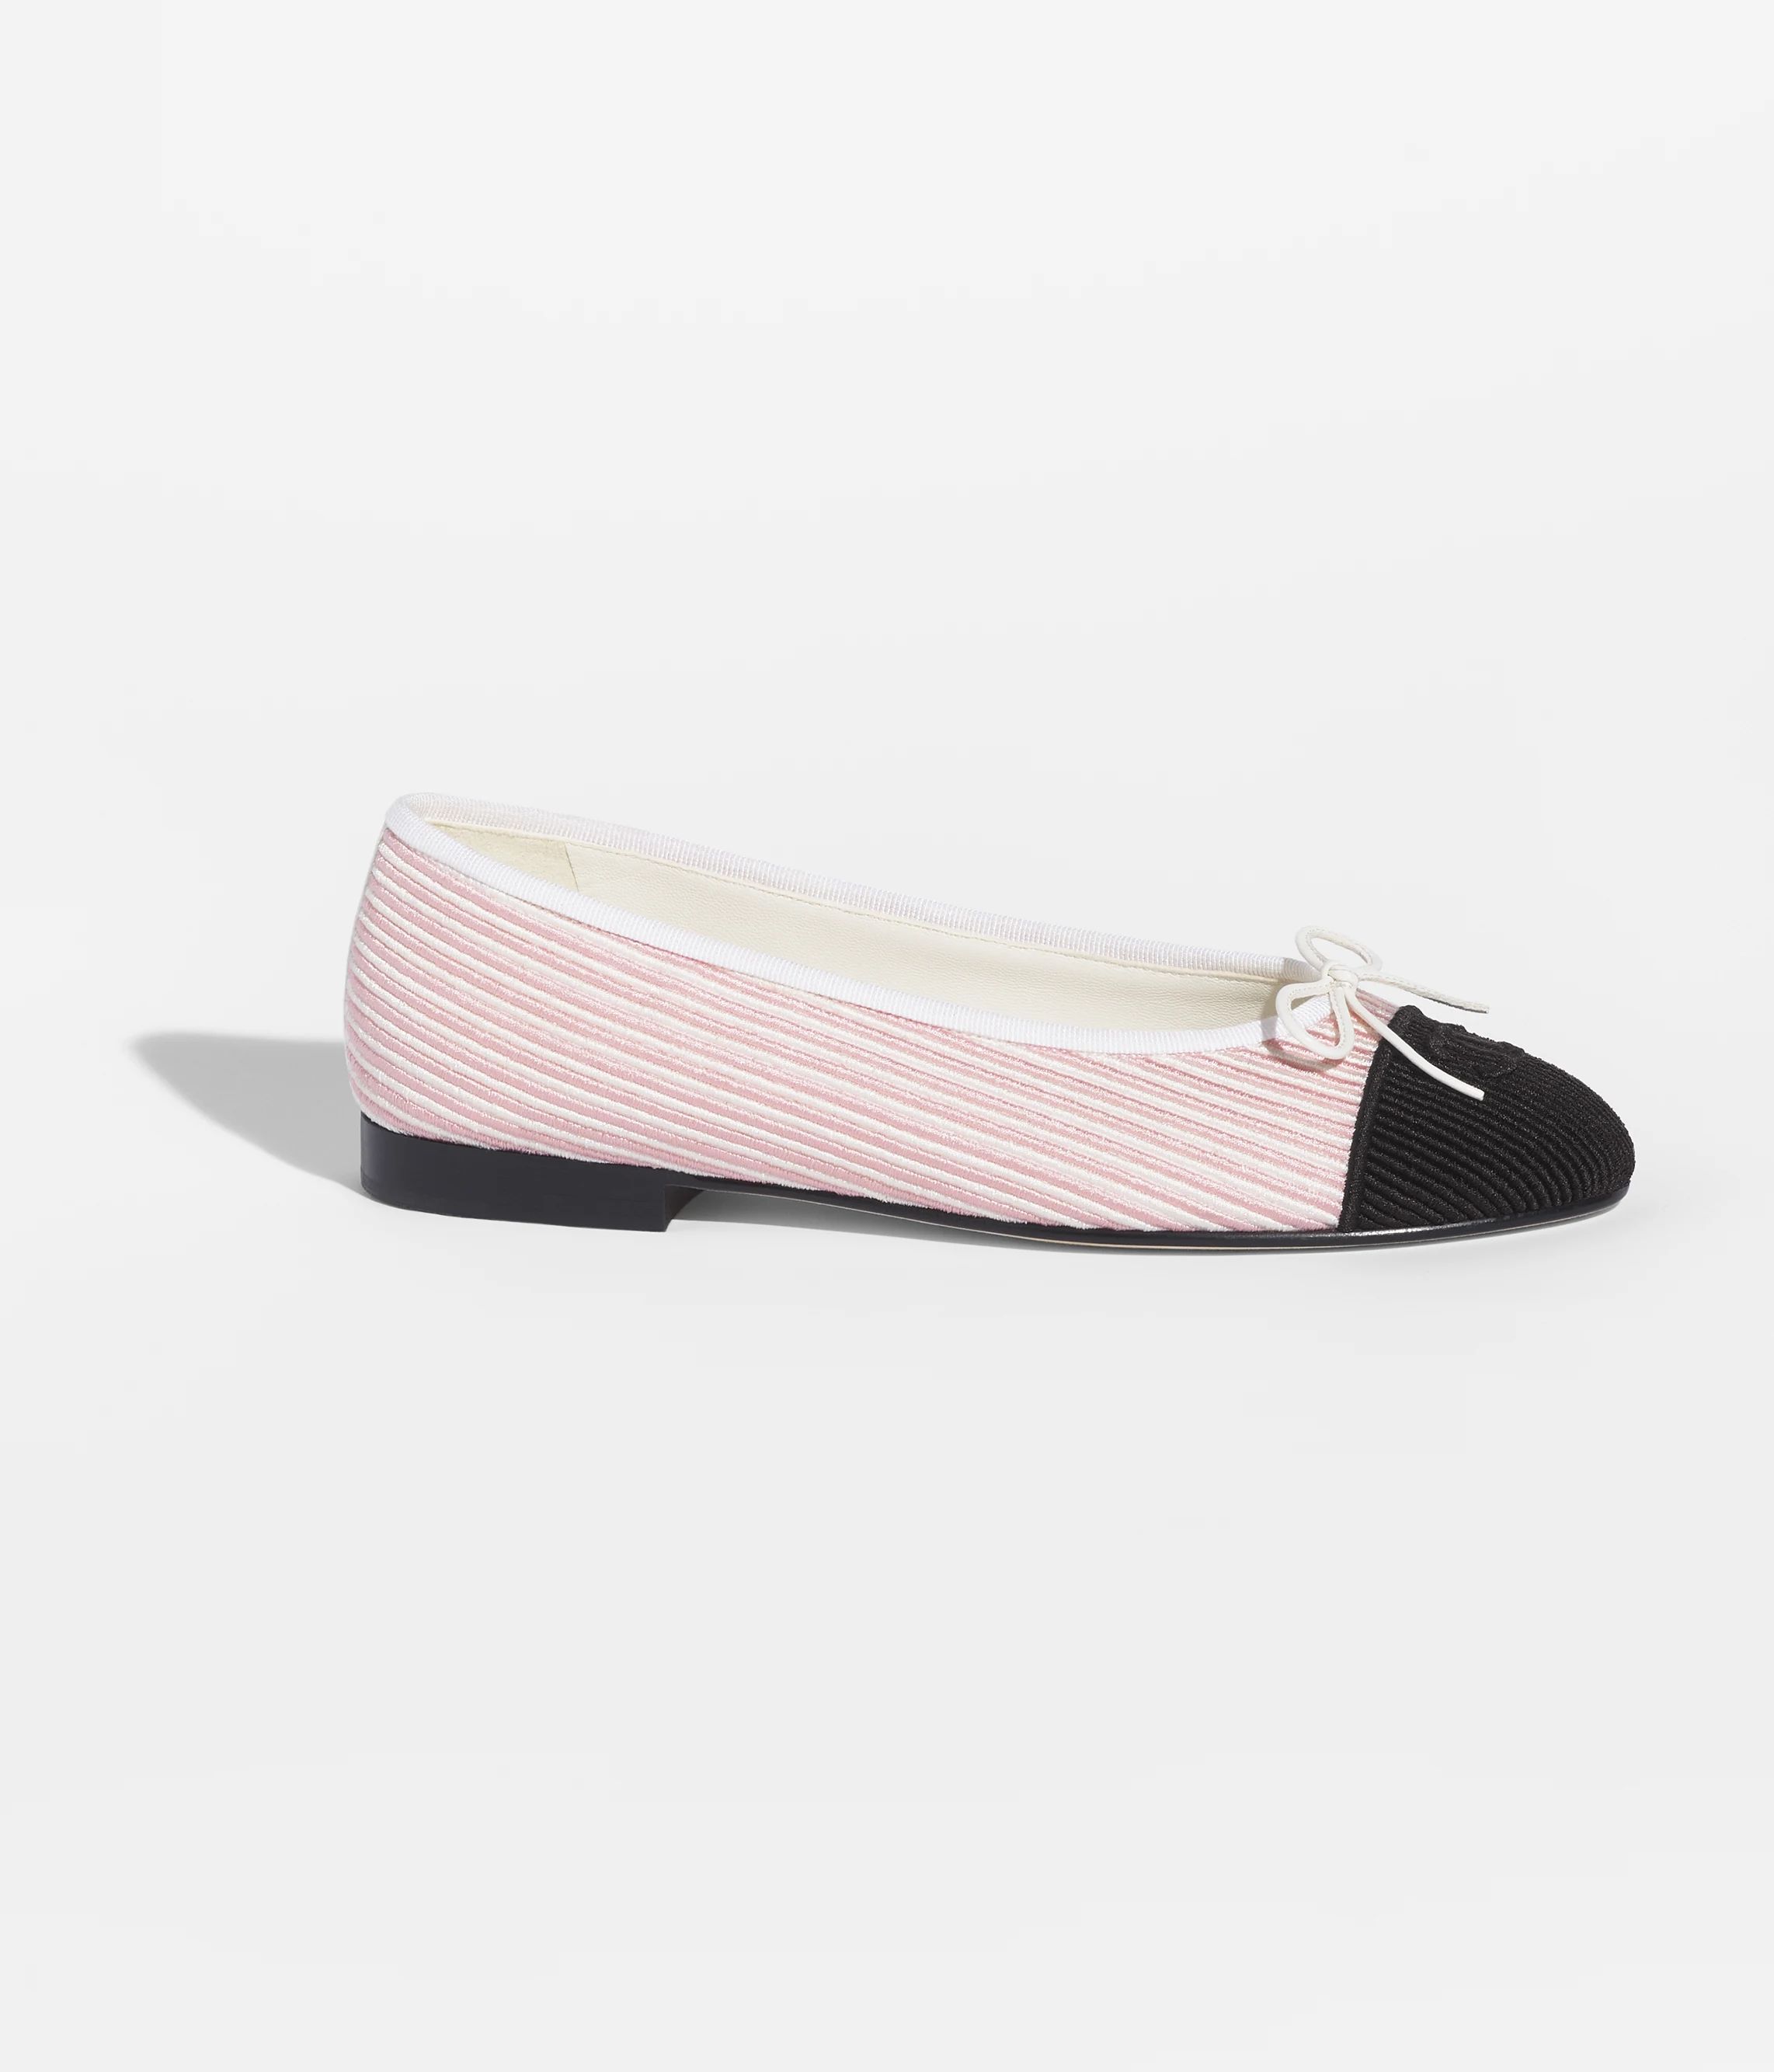 Ballet flats - Embroidered fabric, white, light pink & black — Fashion | CHANEL | Chanel, Inc. (US)